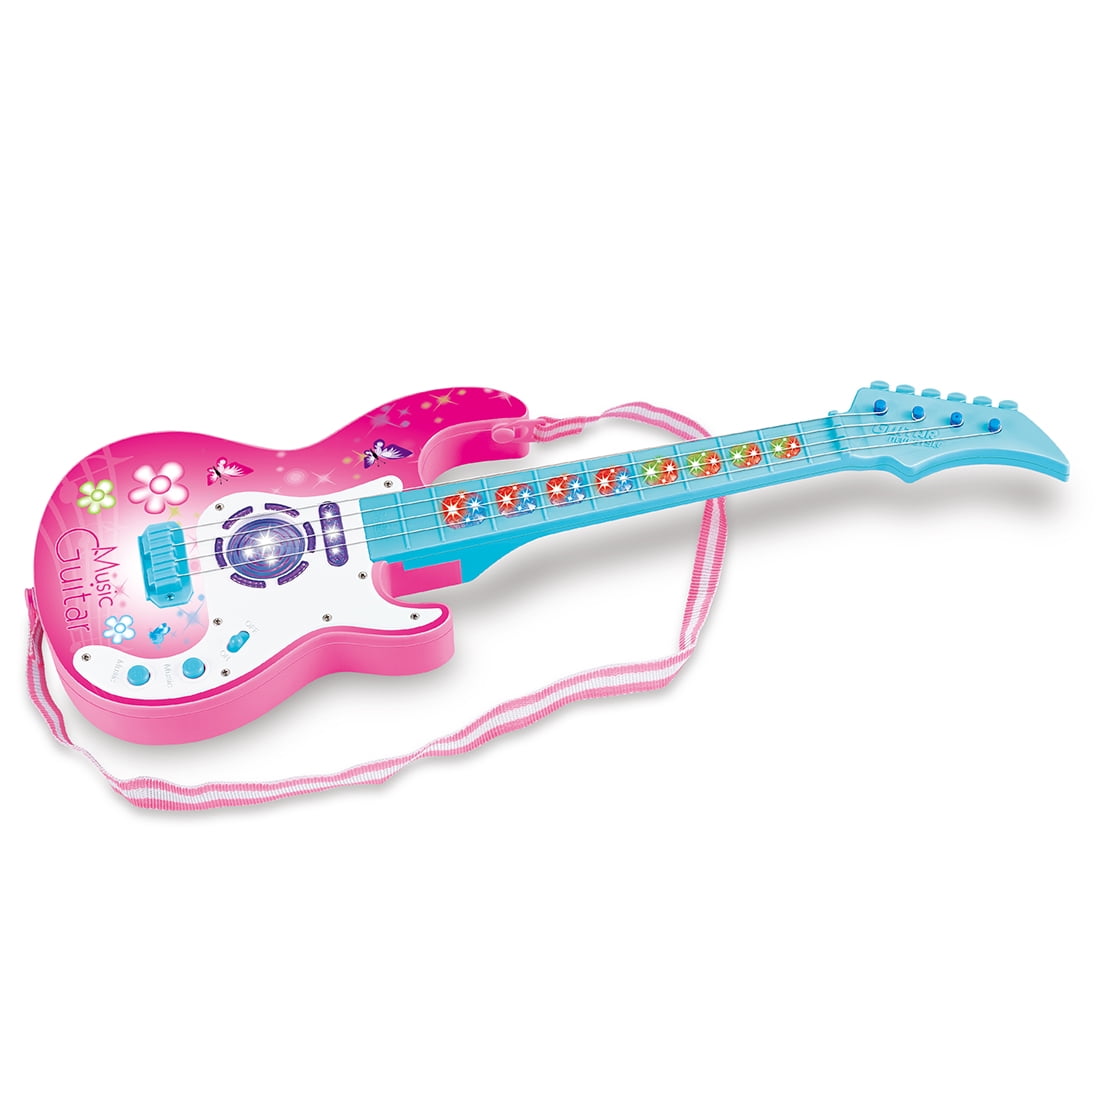 GIRL ELECTRIC ROCK GUITAR MUSICAL INSTRUMENT EDUCATIONAL TOY MUSIC LIGHT SIZE 53 